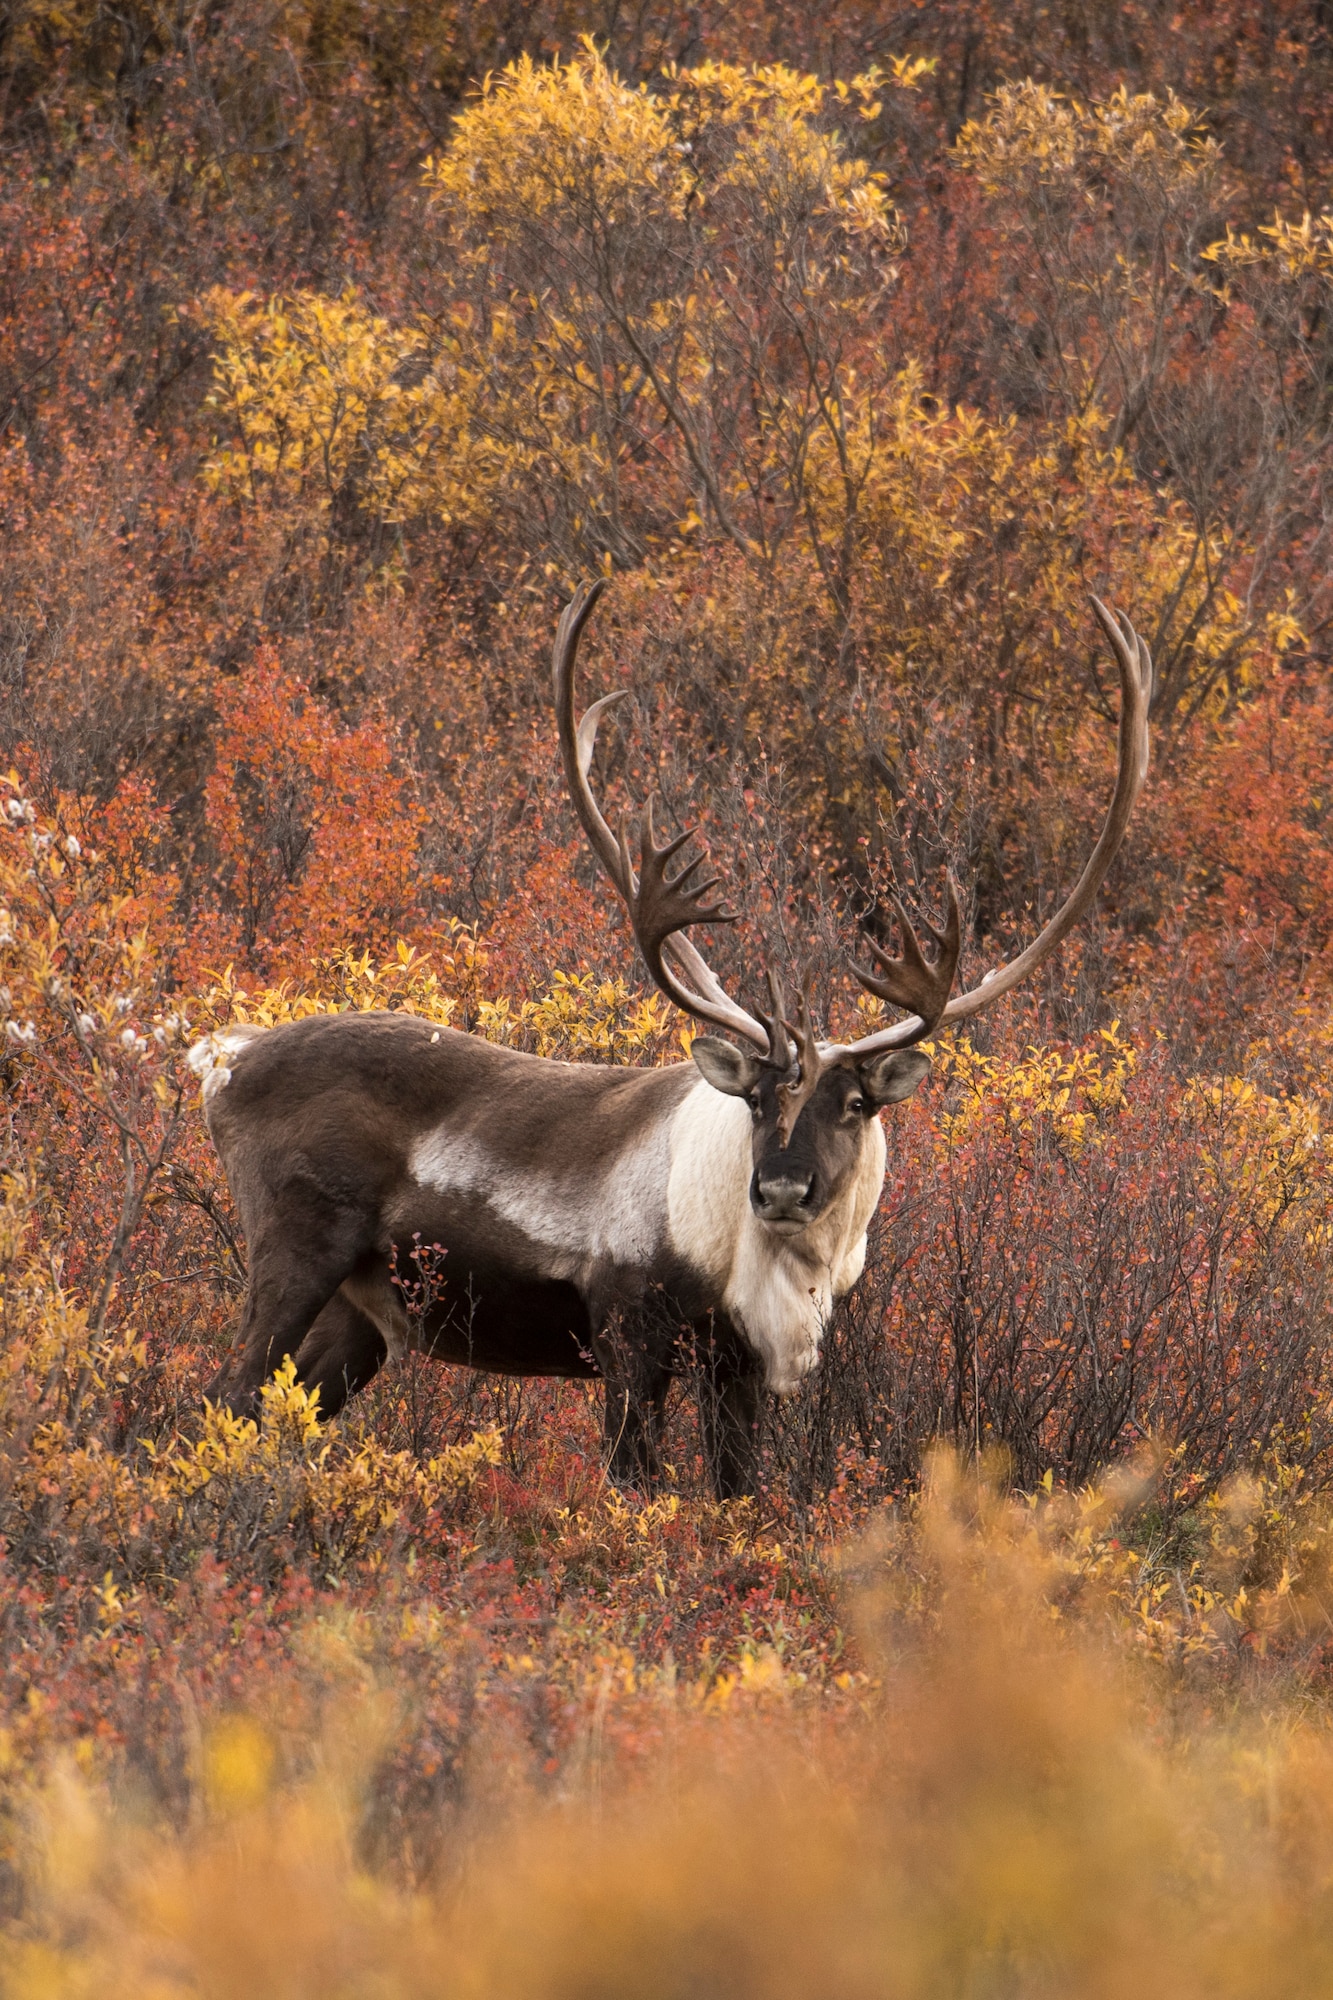 A caribou stands on a hillside at Mile 31 during Military Appreciation Day, Denali National Park and Preserve, Alaska, Sept. 15, 2018. The 11th annual Military Appreciation Day included 400 “road lottery” tickets given out to Alaska-based service members. With the warm, dry weather conditions this year, road lottery recipients were given the chance to drive out to the end of the park road at Mile 92.